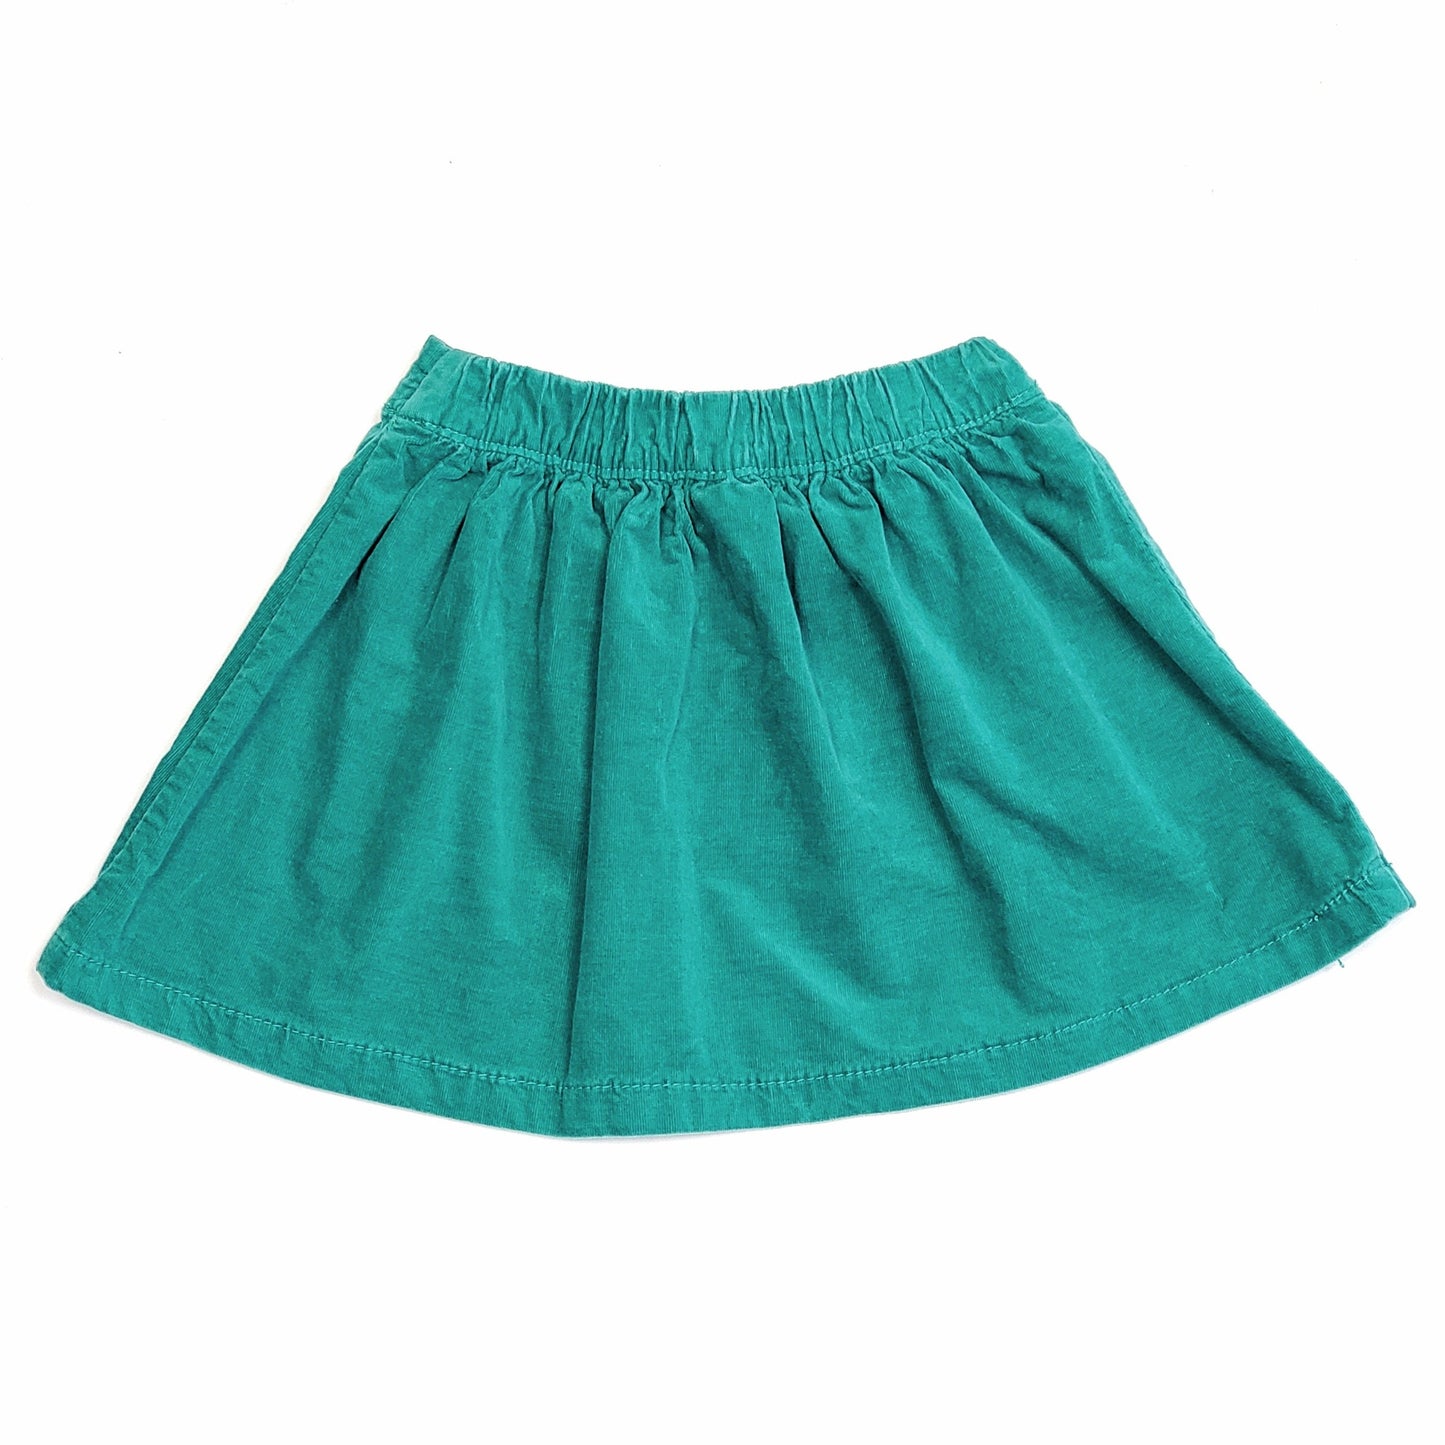 Carters Girls Green Corduroy Skirt 5T Used View 2